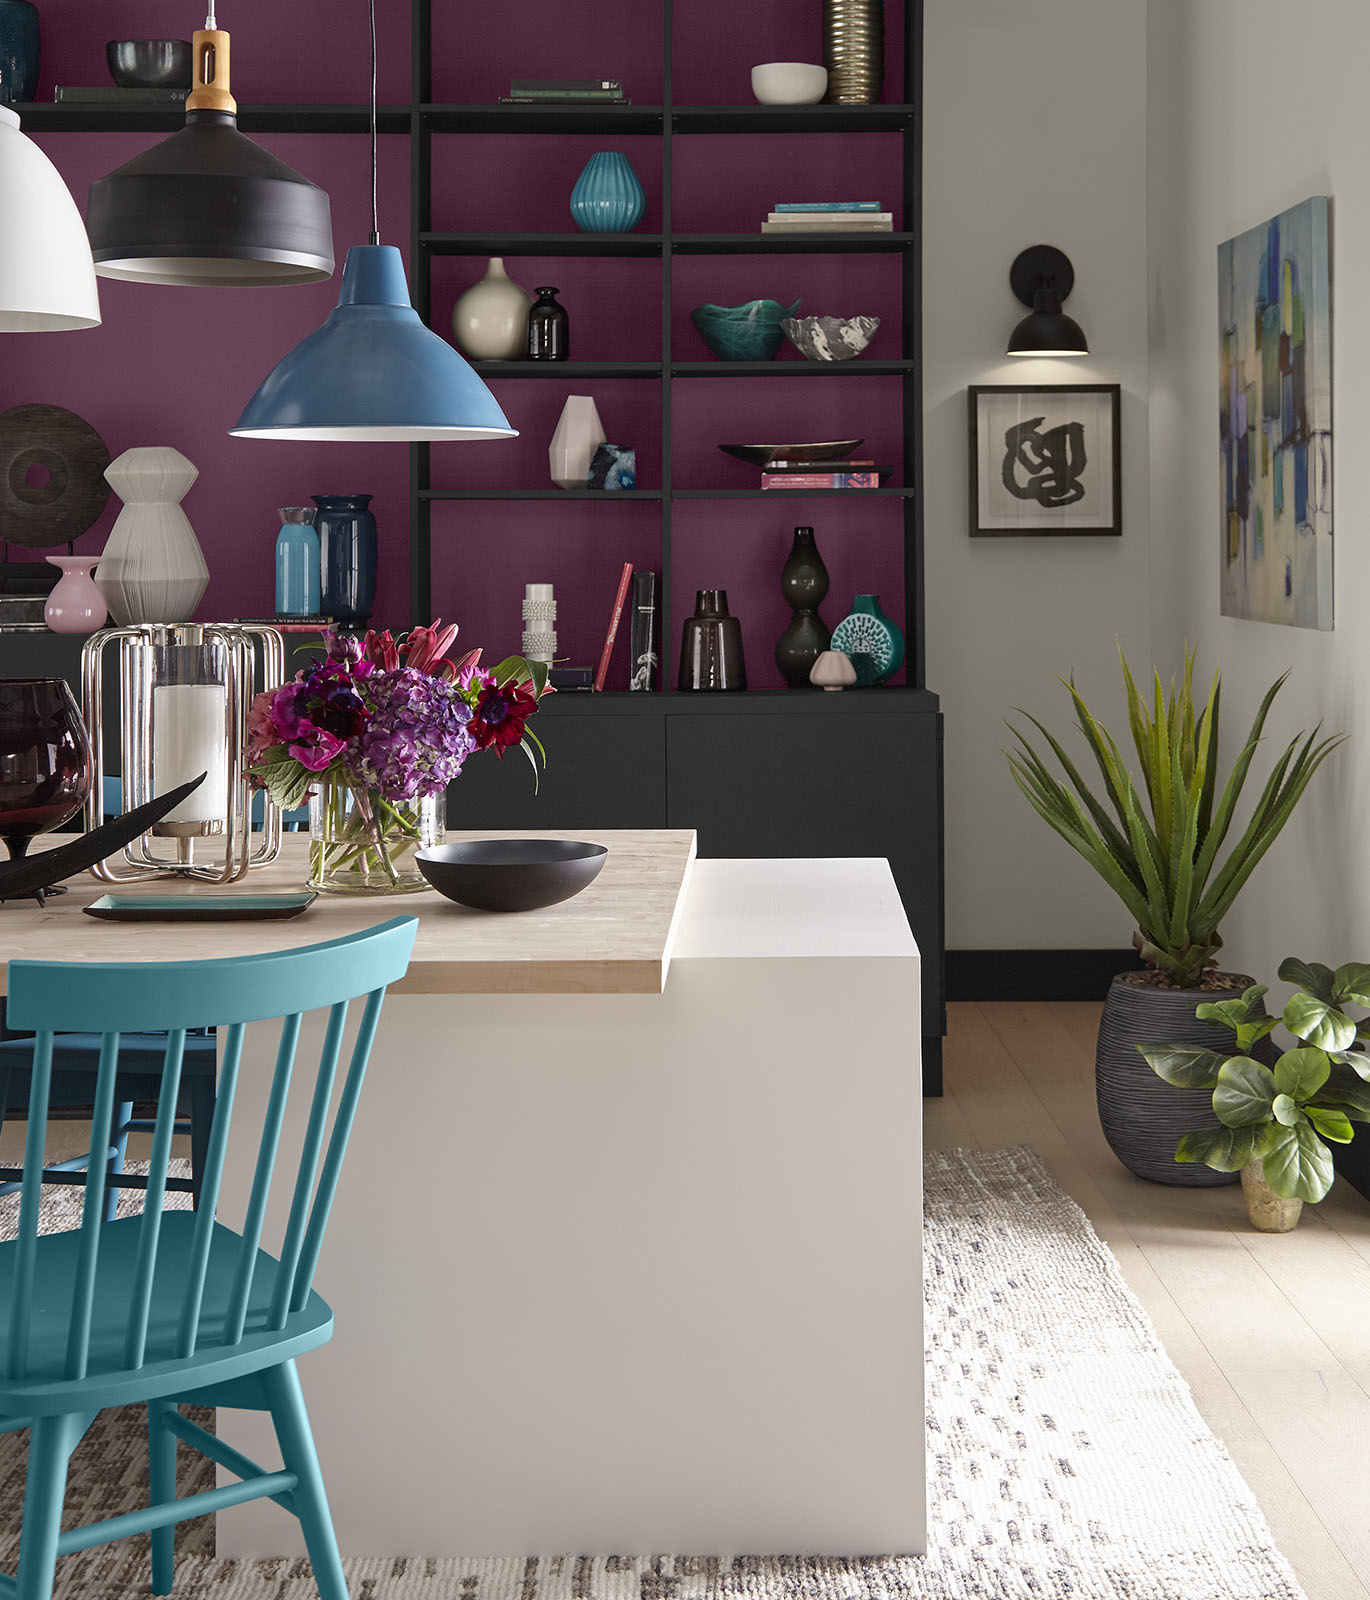 A dining room with a white and wood table in the foreground. In the background is a bookshelf painted a magenta color inside the shelves and black for the cabinet. The room gives off an optimistic vibe.